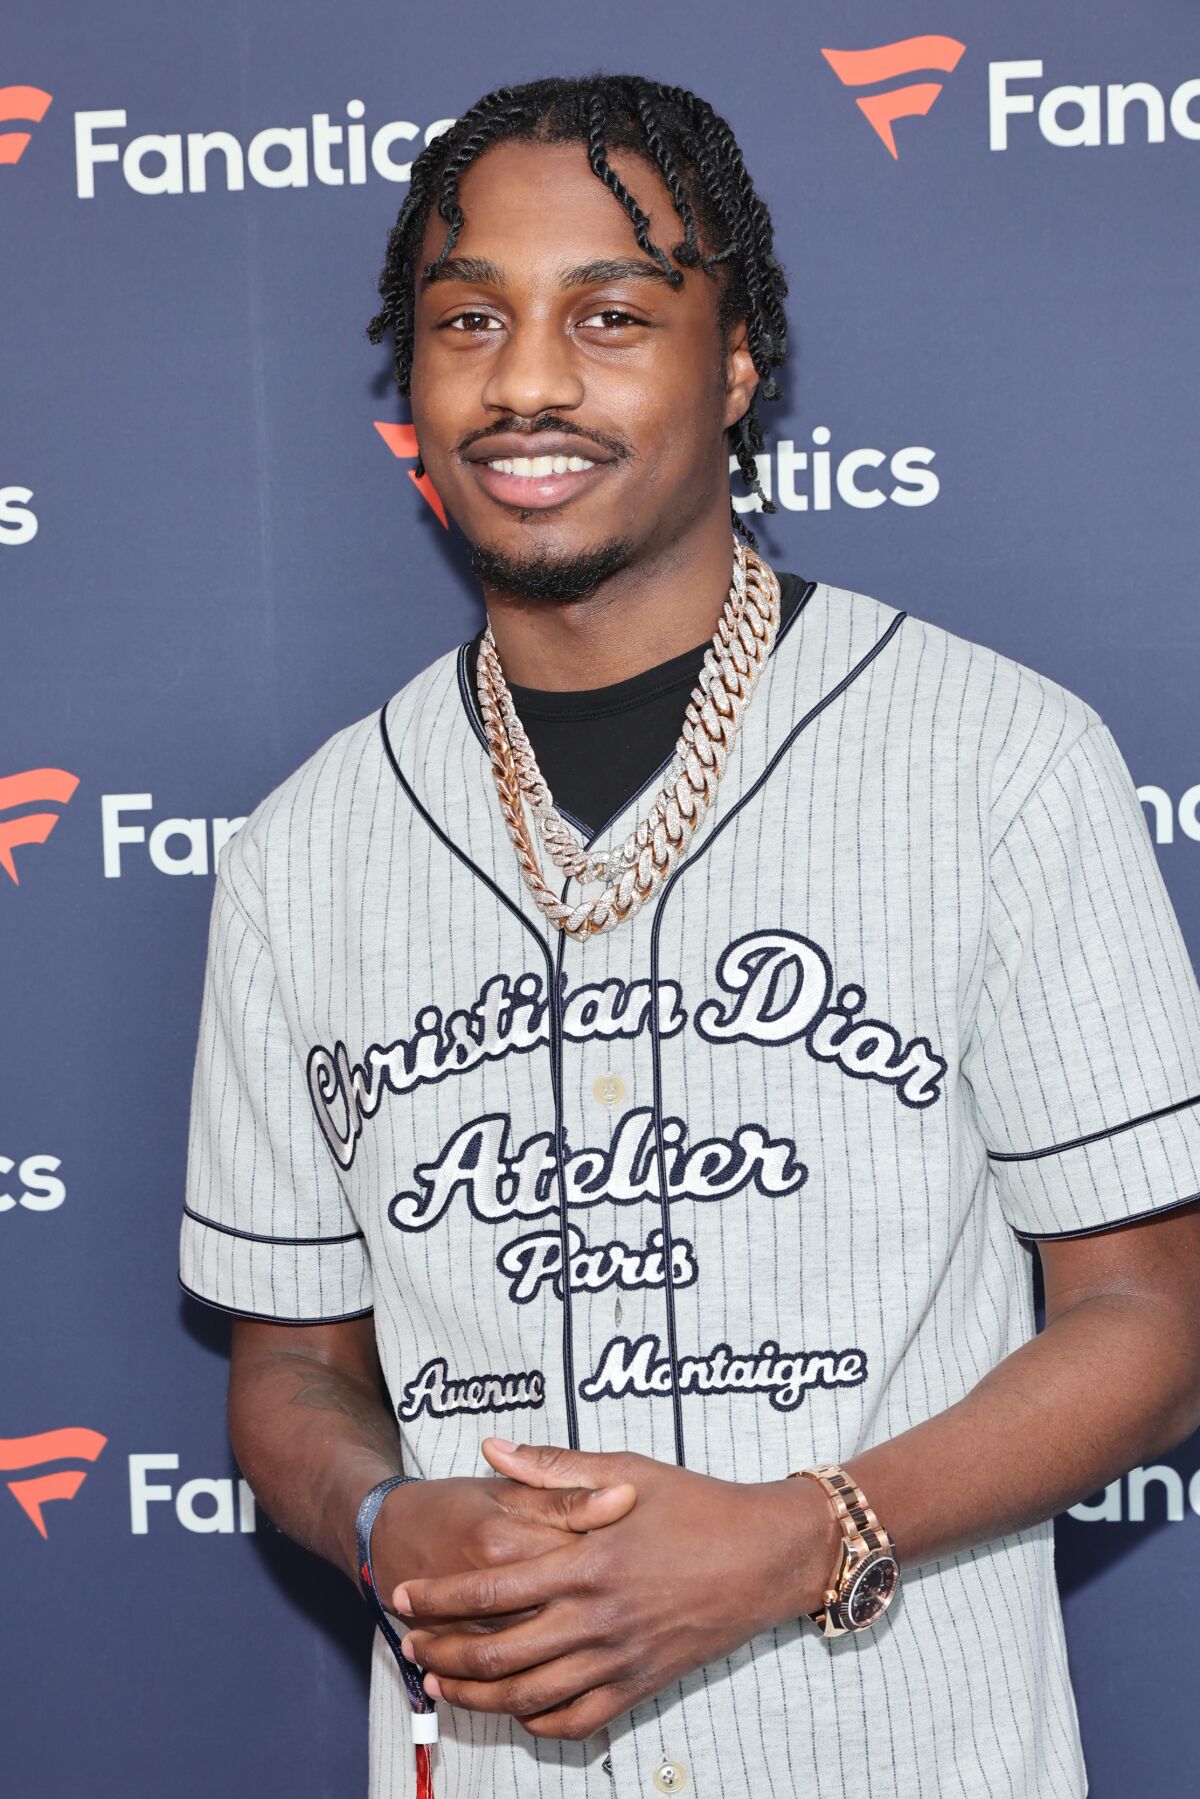 A man wearing a baseball jersey and gold chain